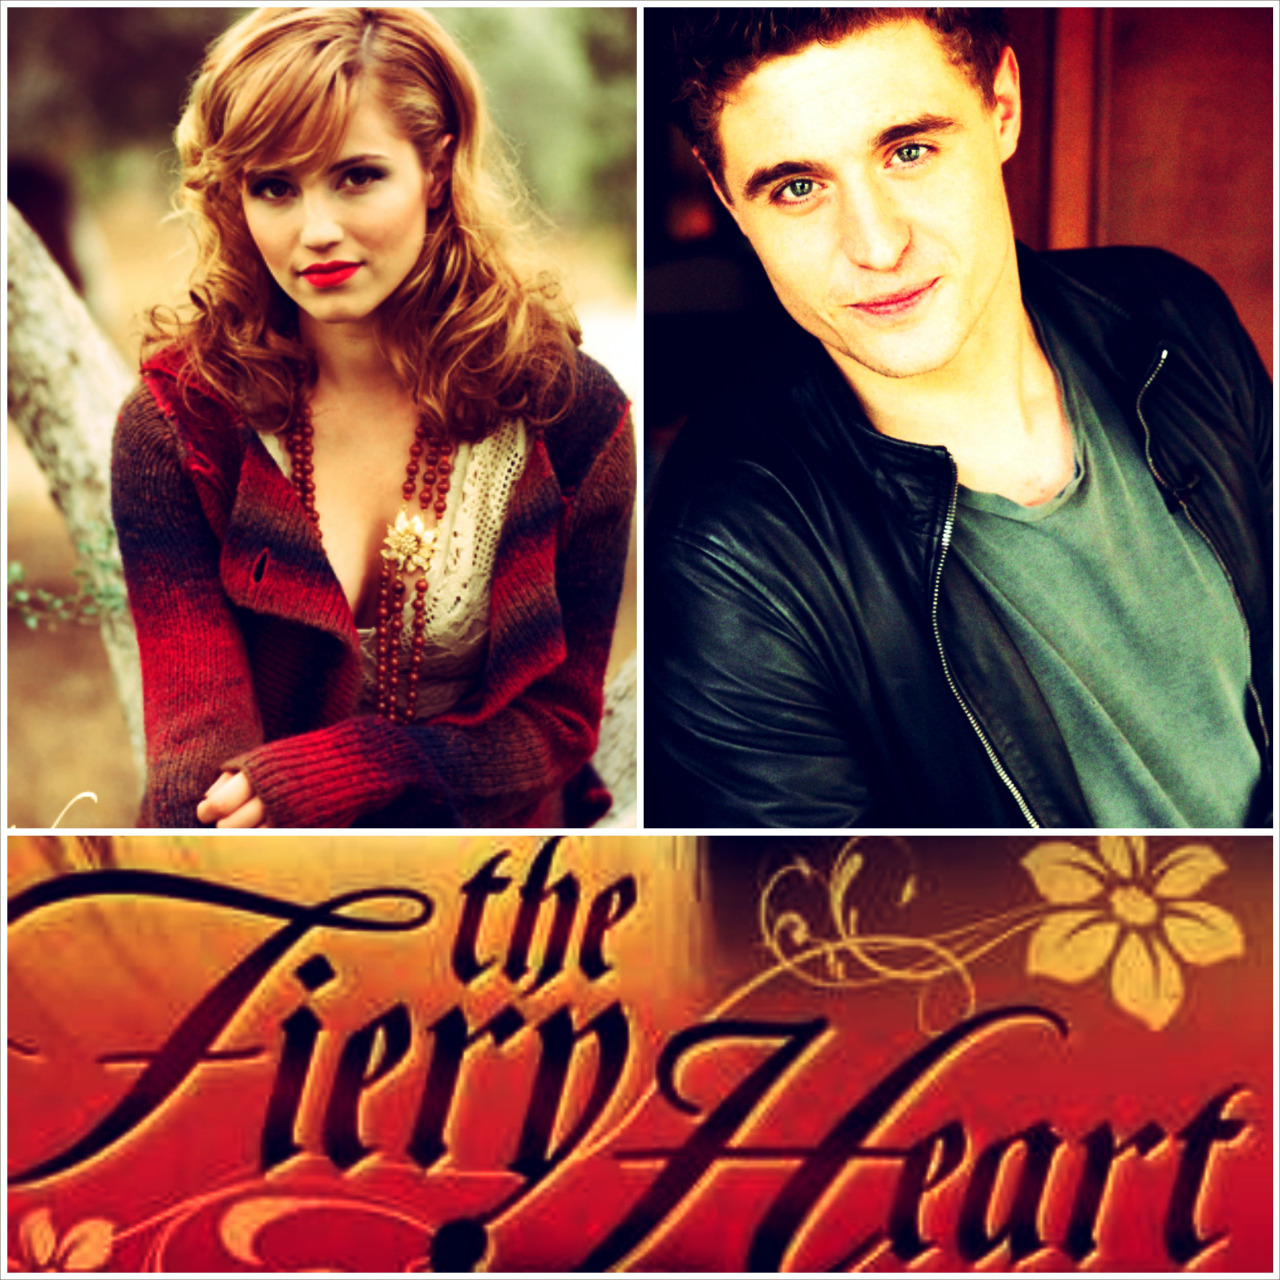 Max Irons And Dianna Agron